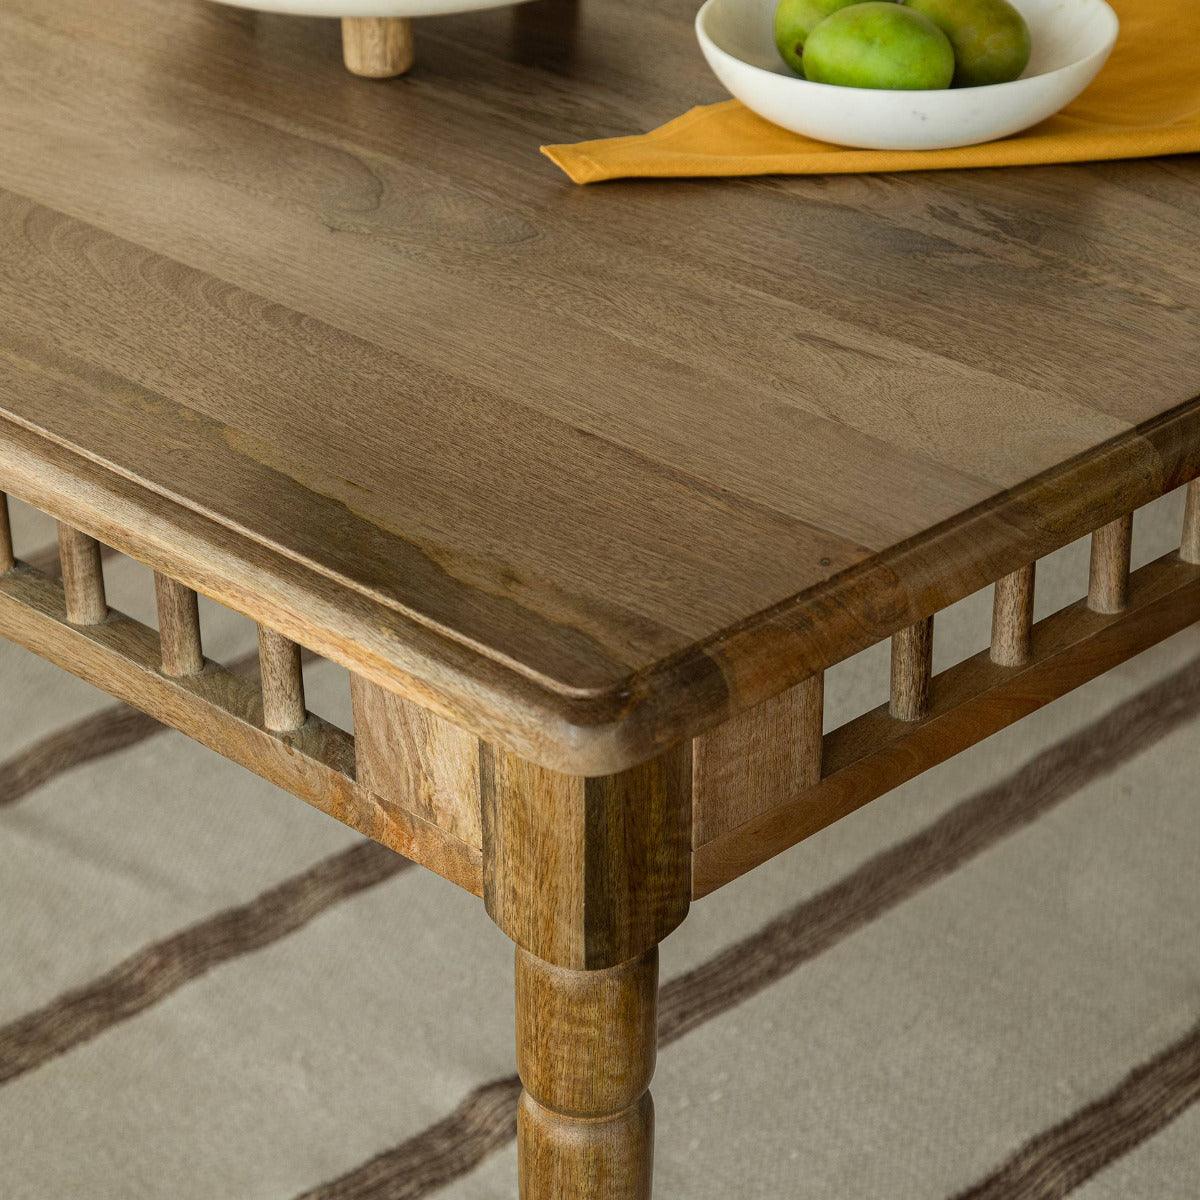 Lei pan ready-to-assemble dining table